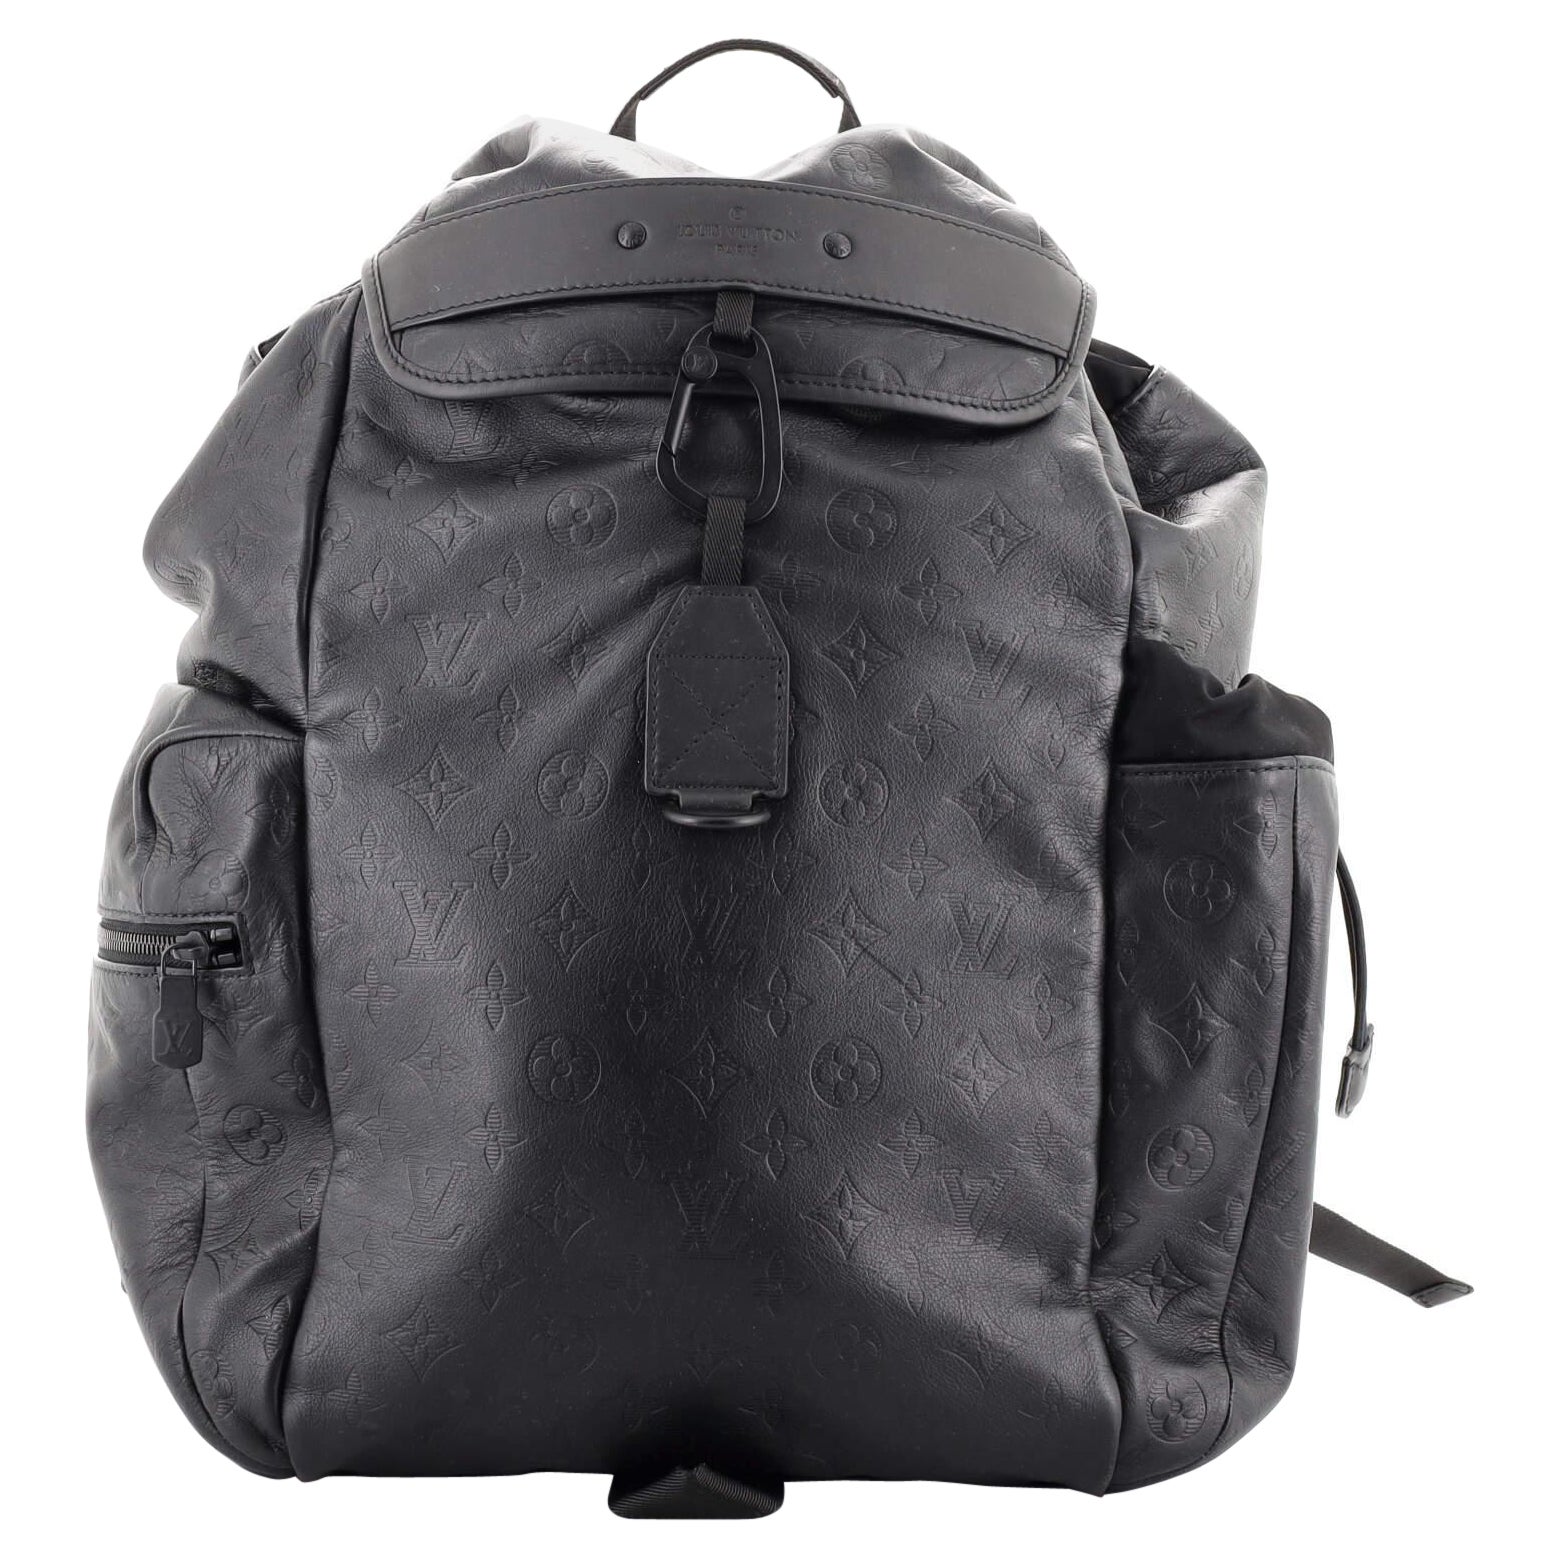 Shop Louis Vuitton Discovery Discovery backpack (M43680) by JOY＋